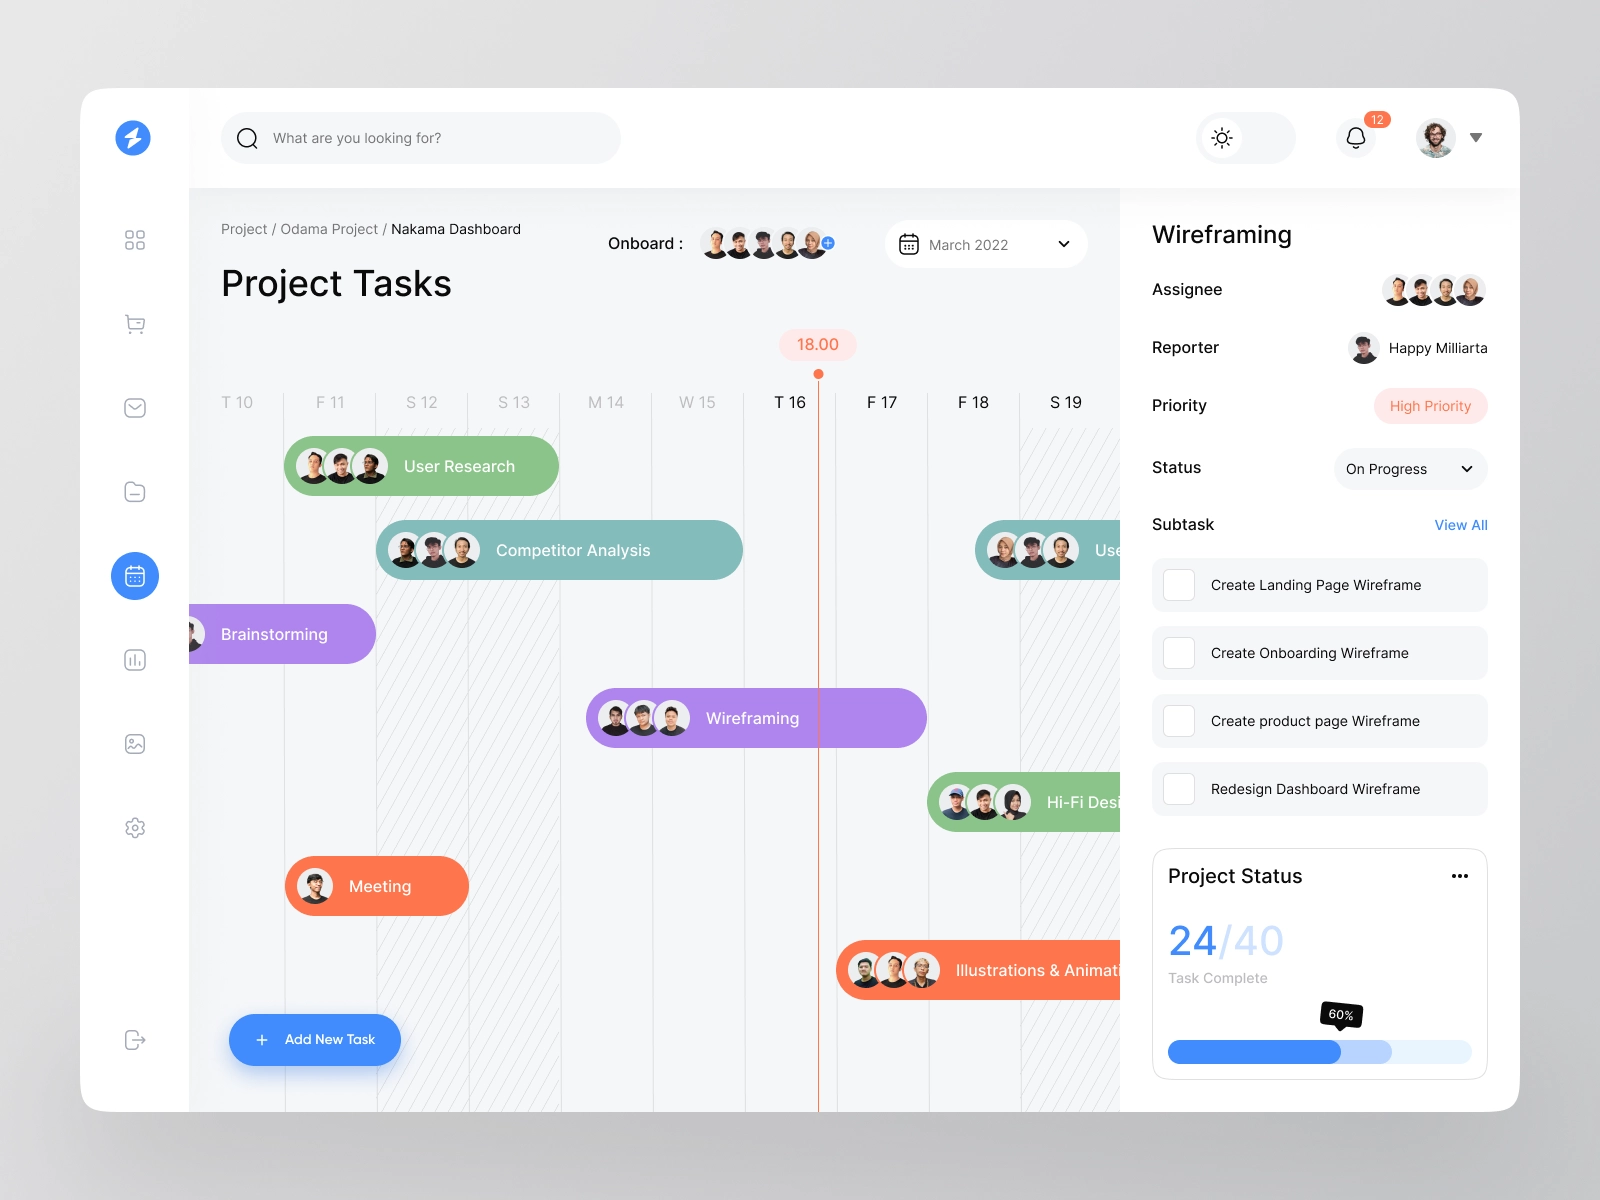 Project Management tool that allows creating QA tasks